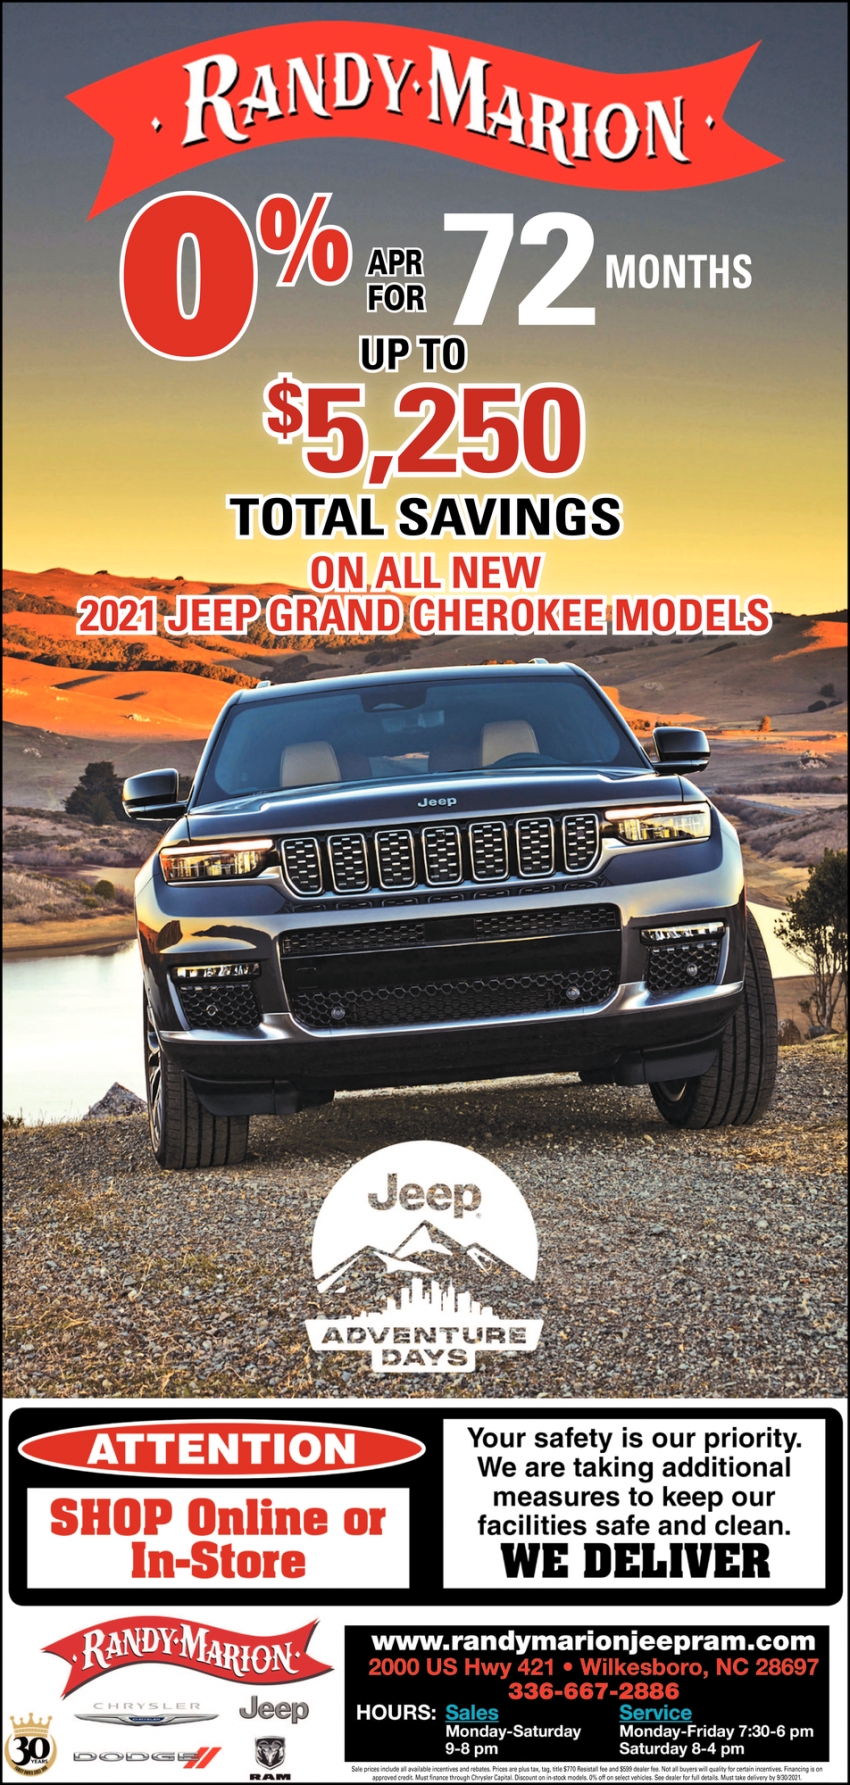 0% APR For 72 Months Up To $5,250 Total Savings On All New 2021 Jeep Grand Cherokee Models